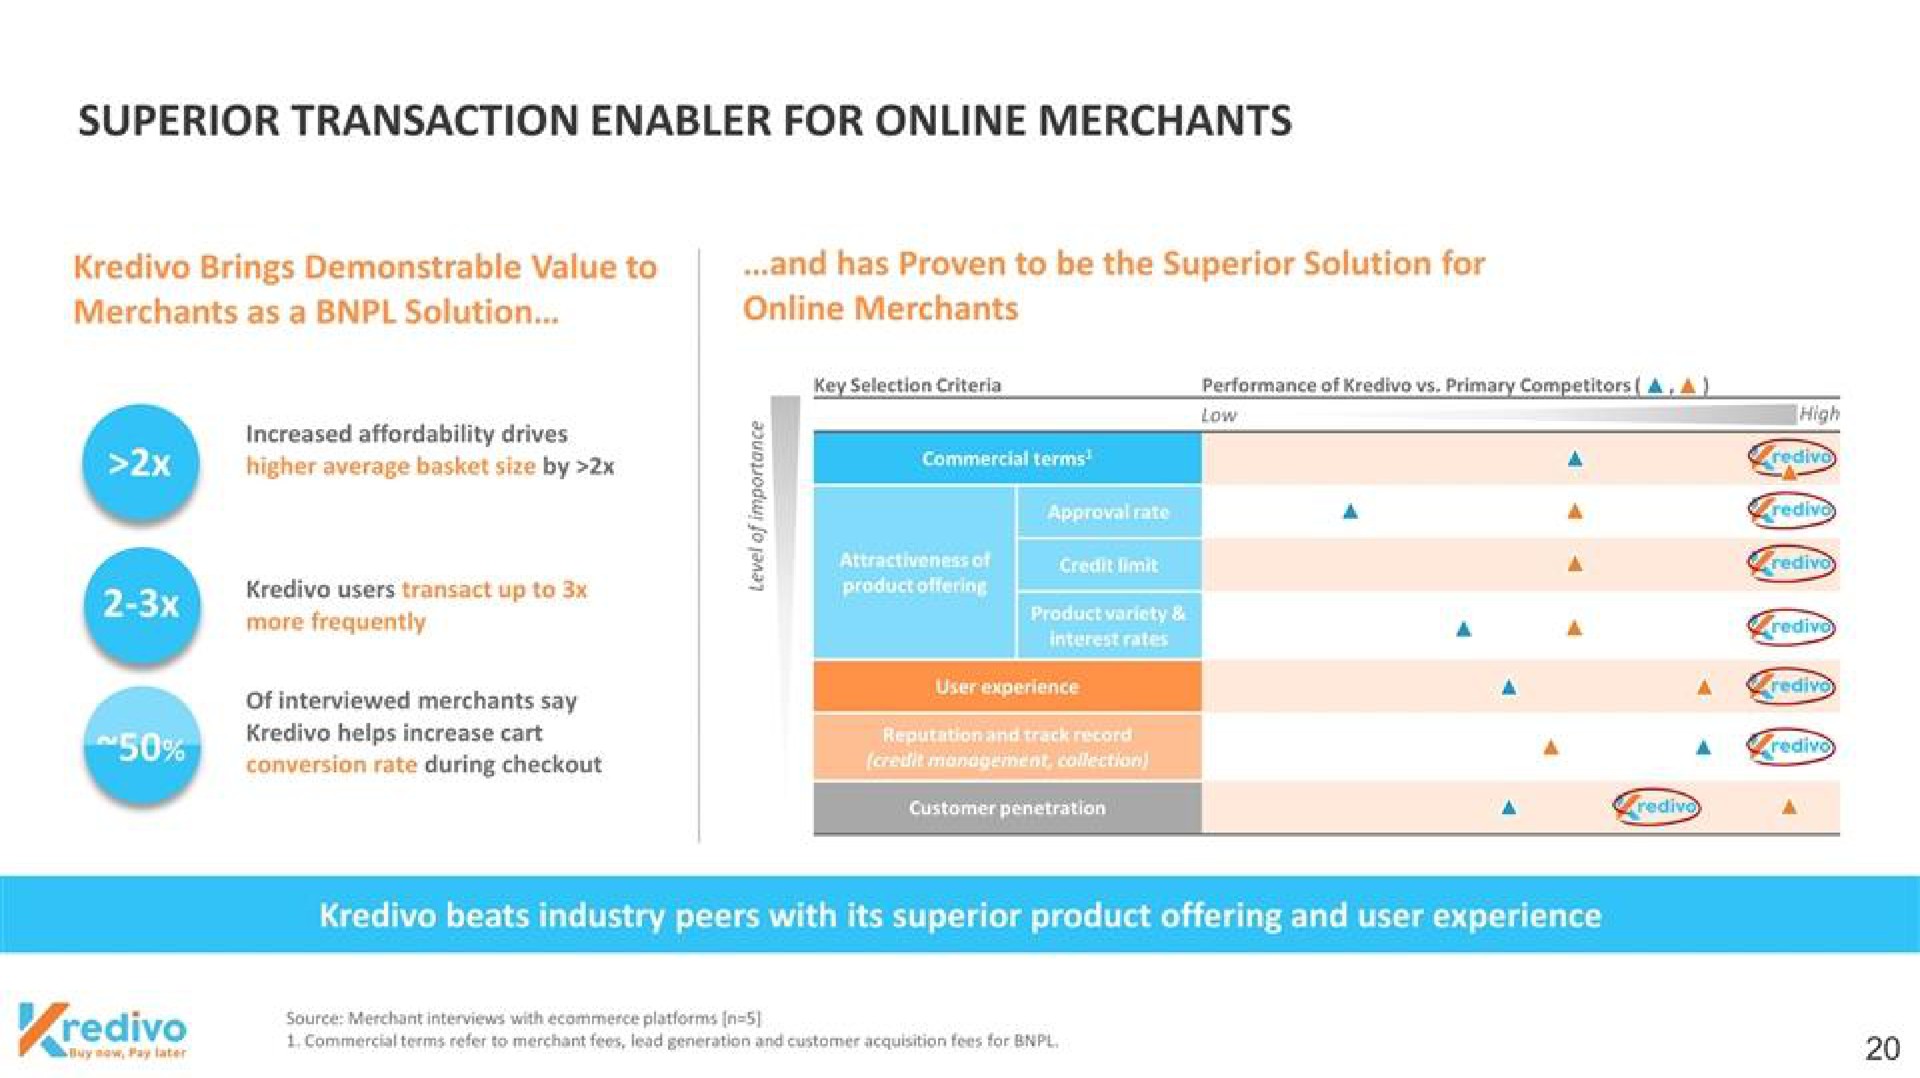 superior transaction enabler for merchants of interviewed merchants say and tra | Kredivo